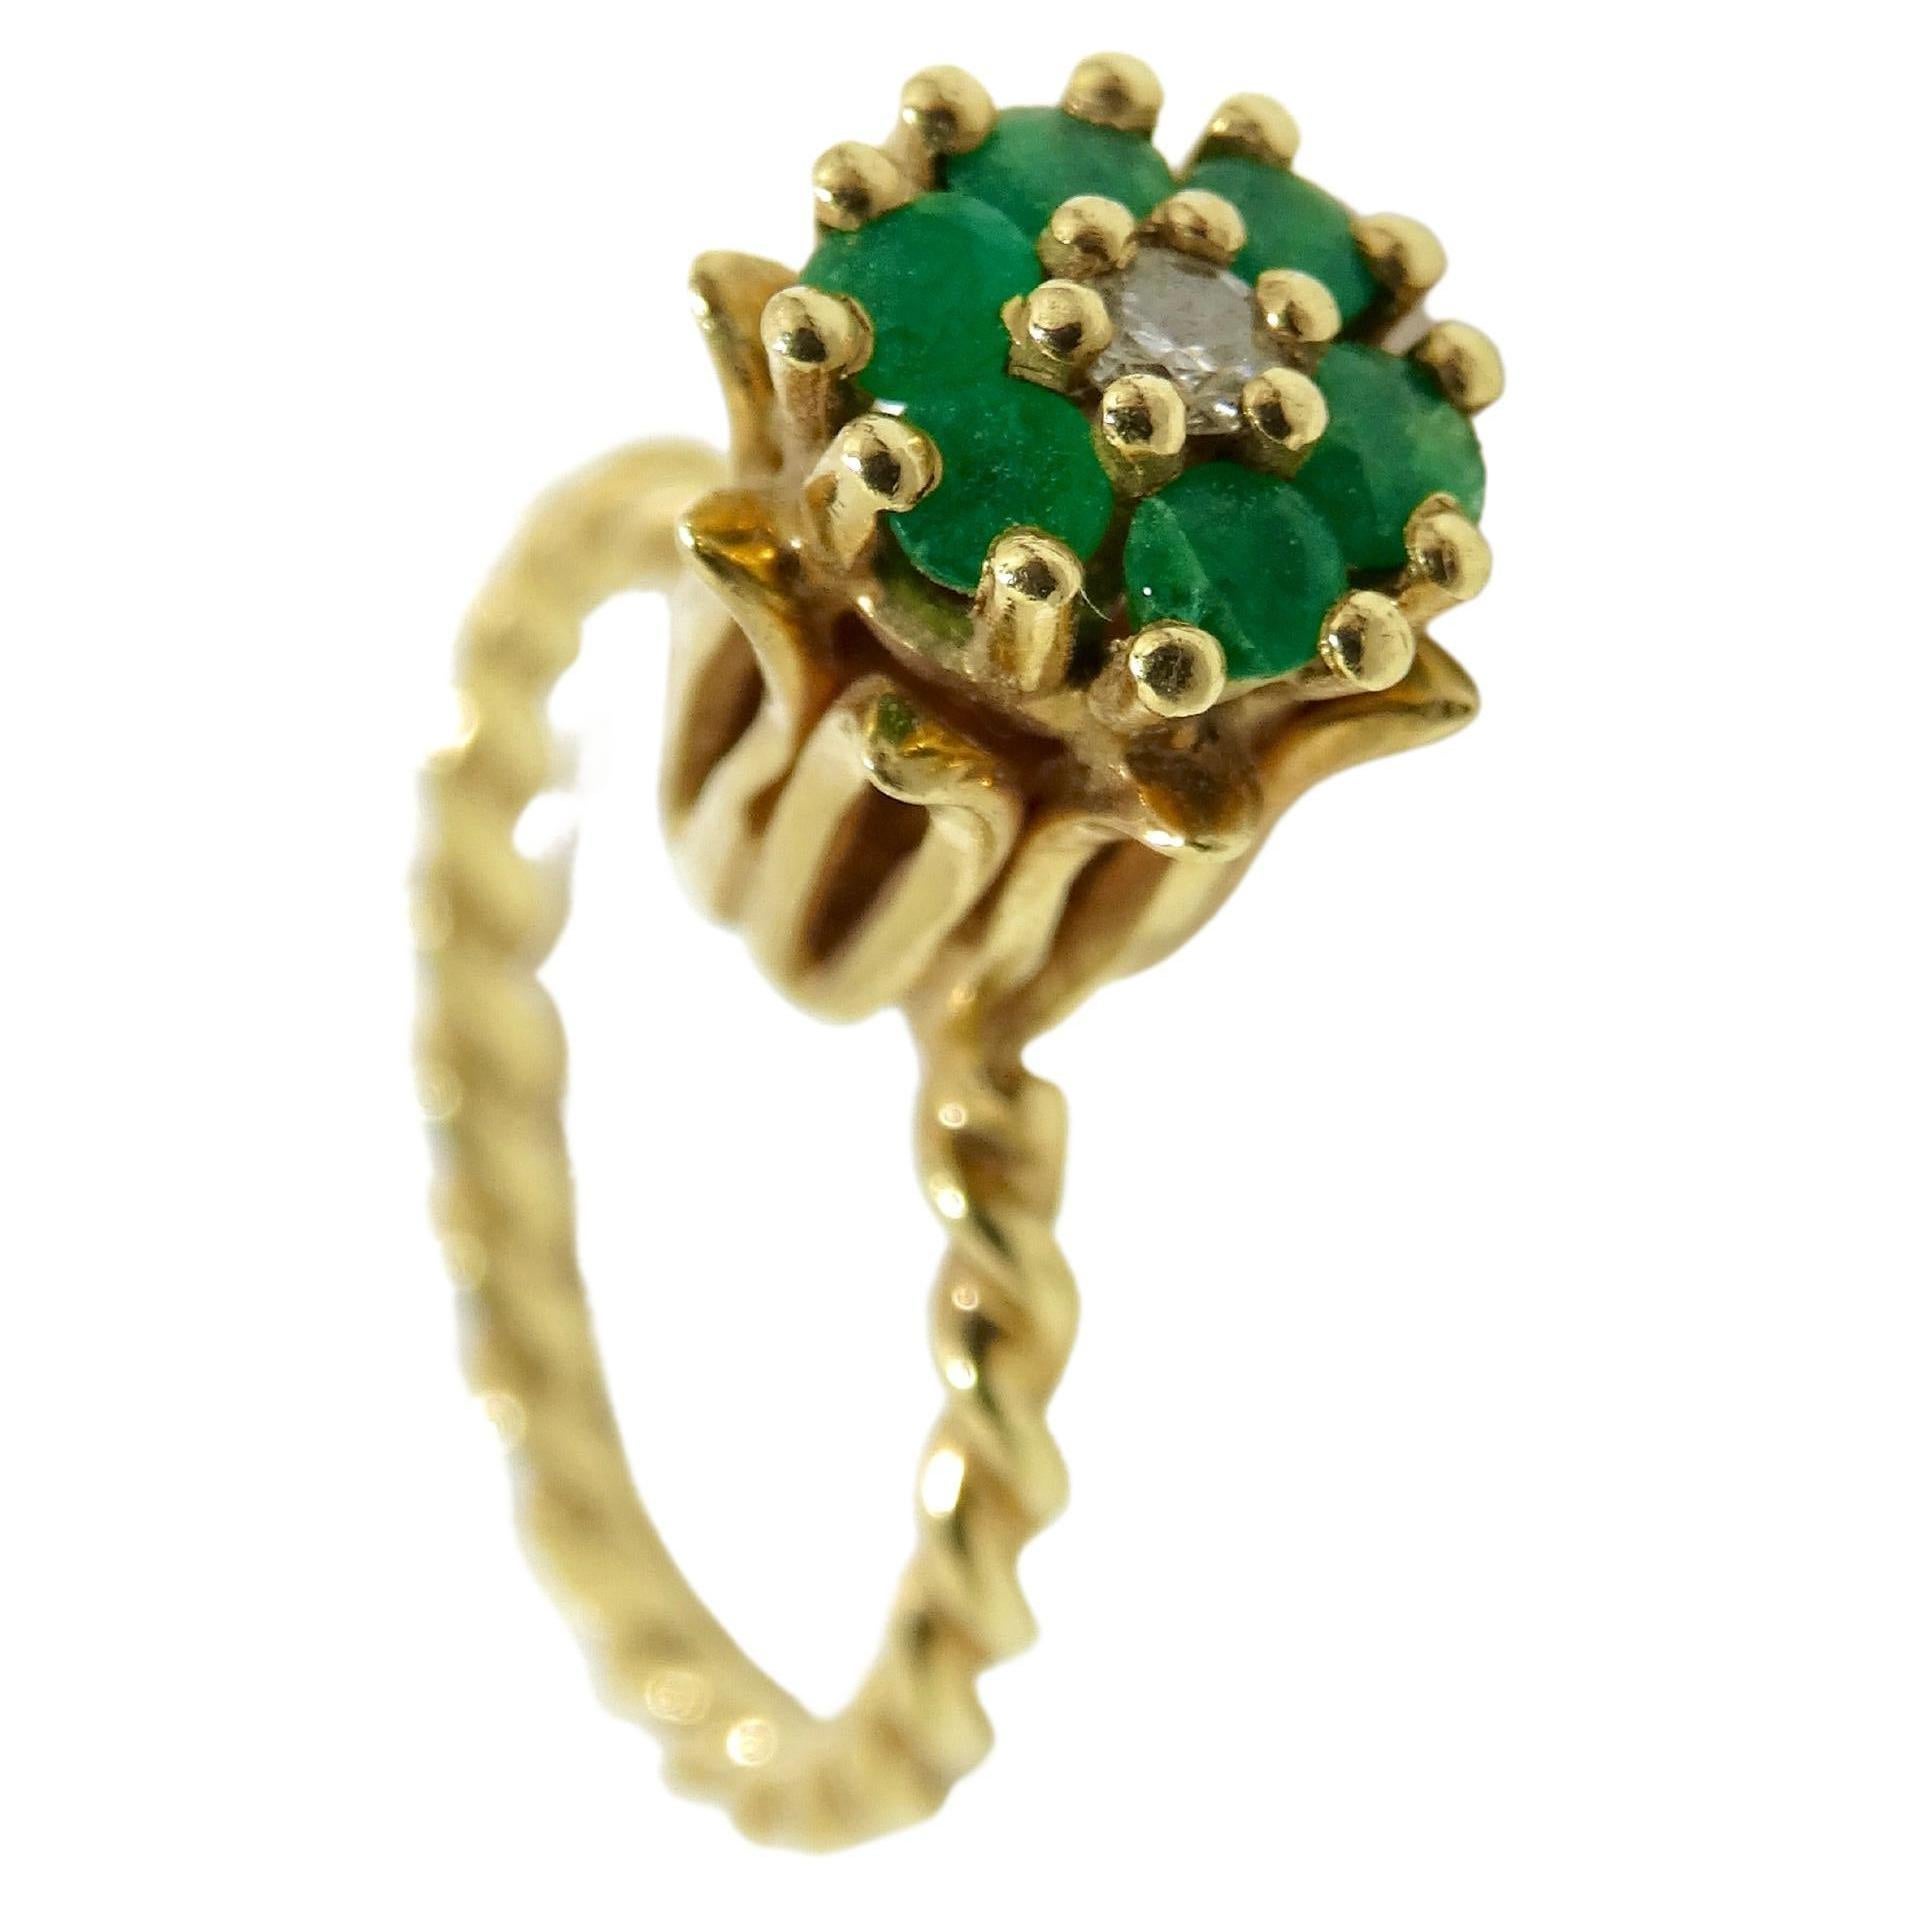 This Diamond and Emerald ring is a perfect layering piece to add to your collection. Green will add a pop of color to your other neutral rings. Don't miss the small details of this ring like the smart flower design. Pair this with a blouse from